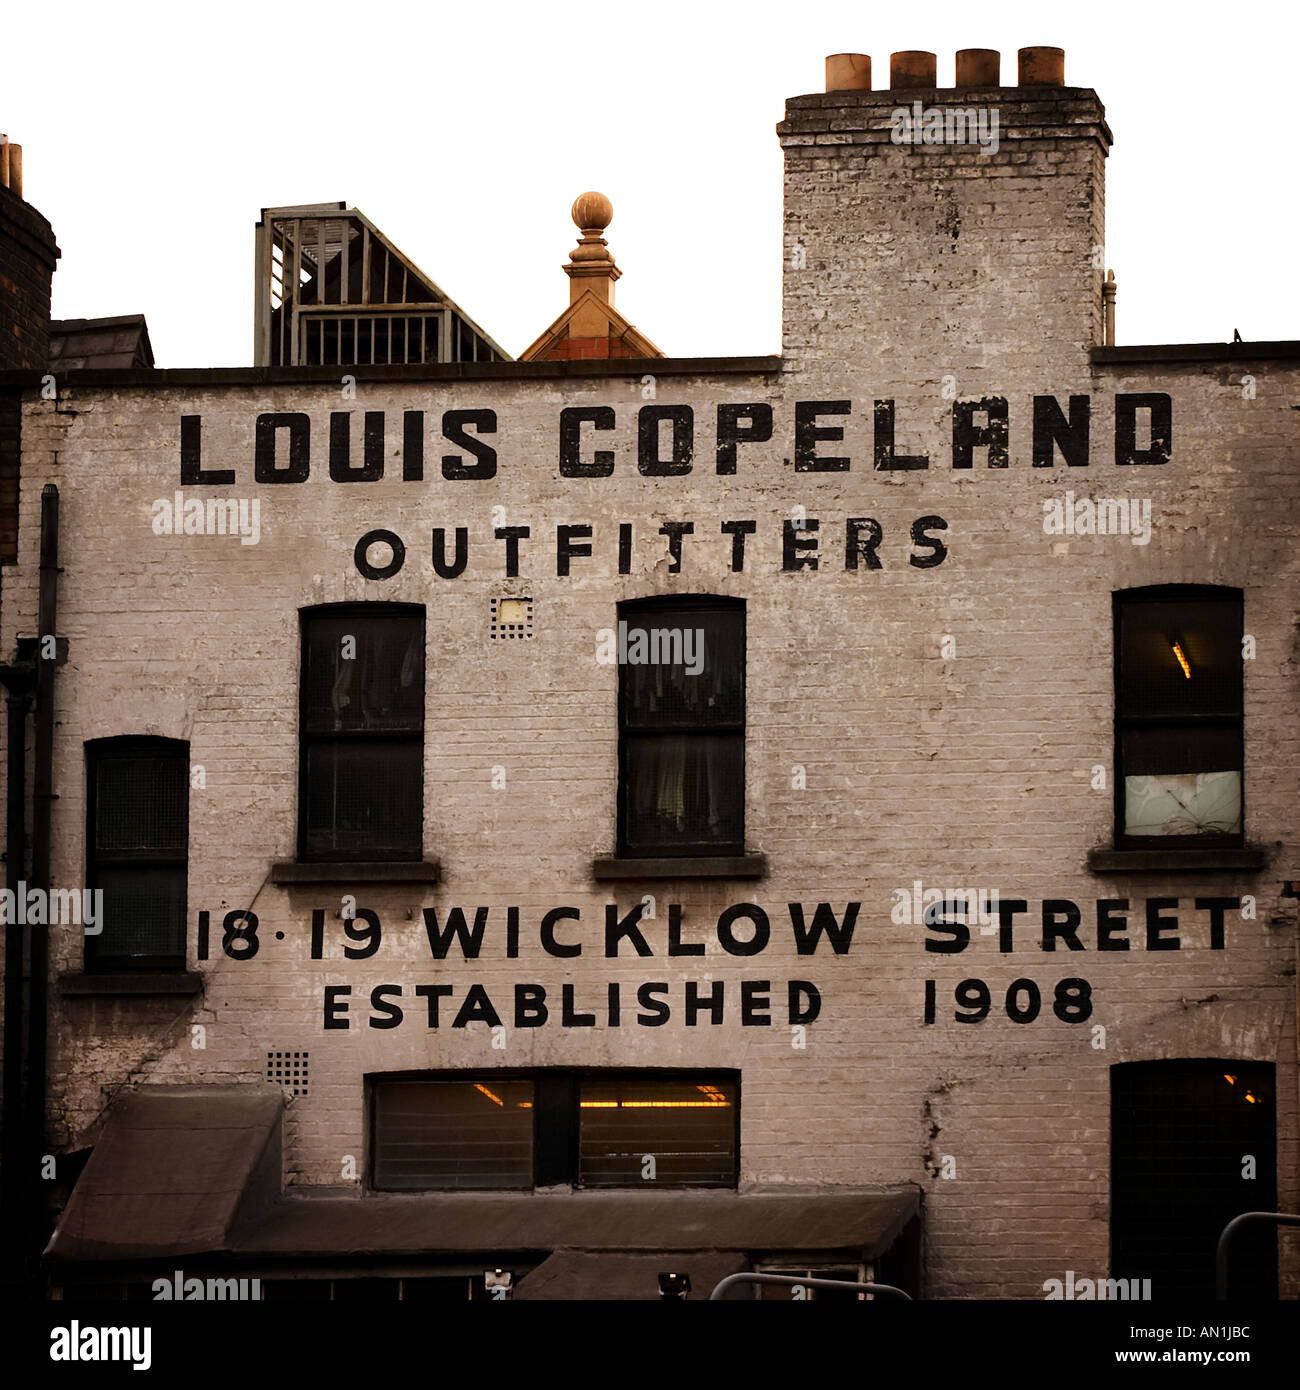 Luis Copeland Outfitters Store Dublin Ireland Europe Stock Photo